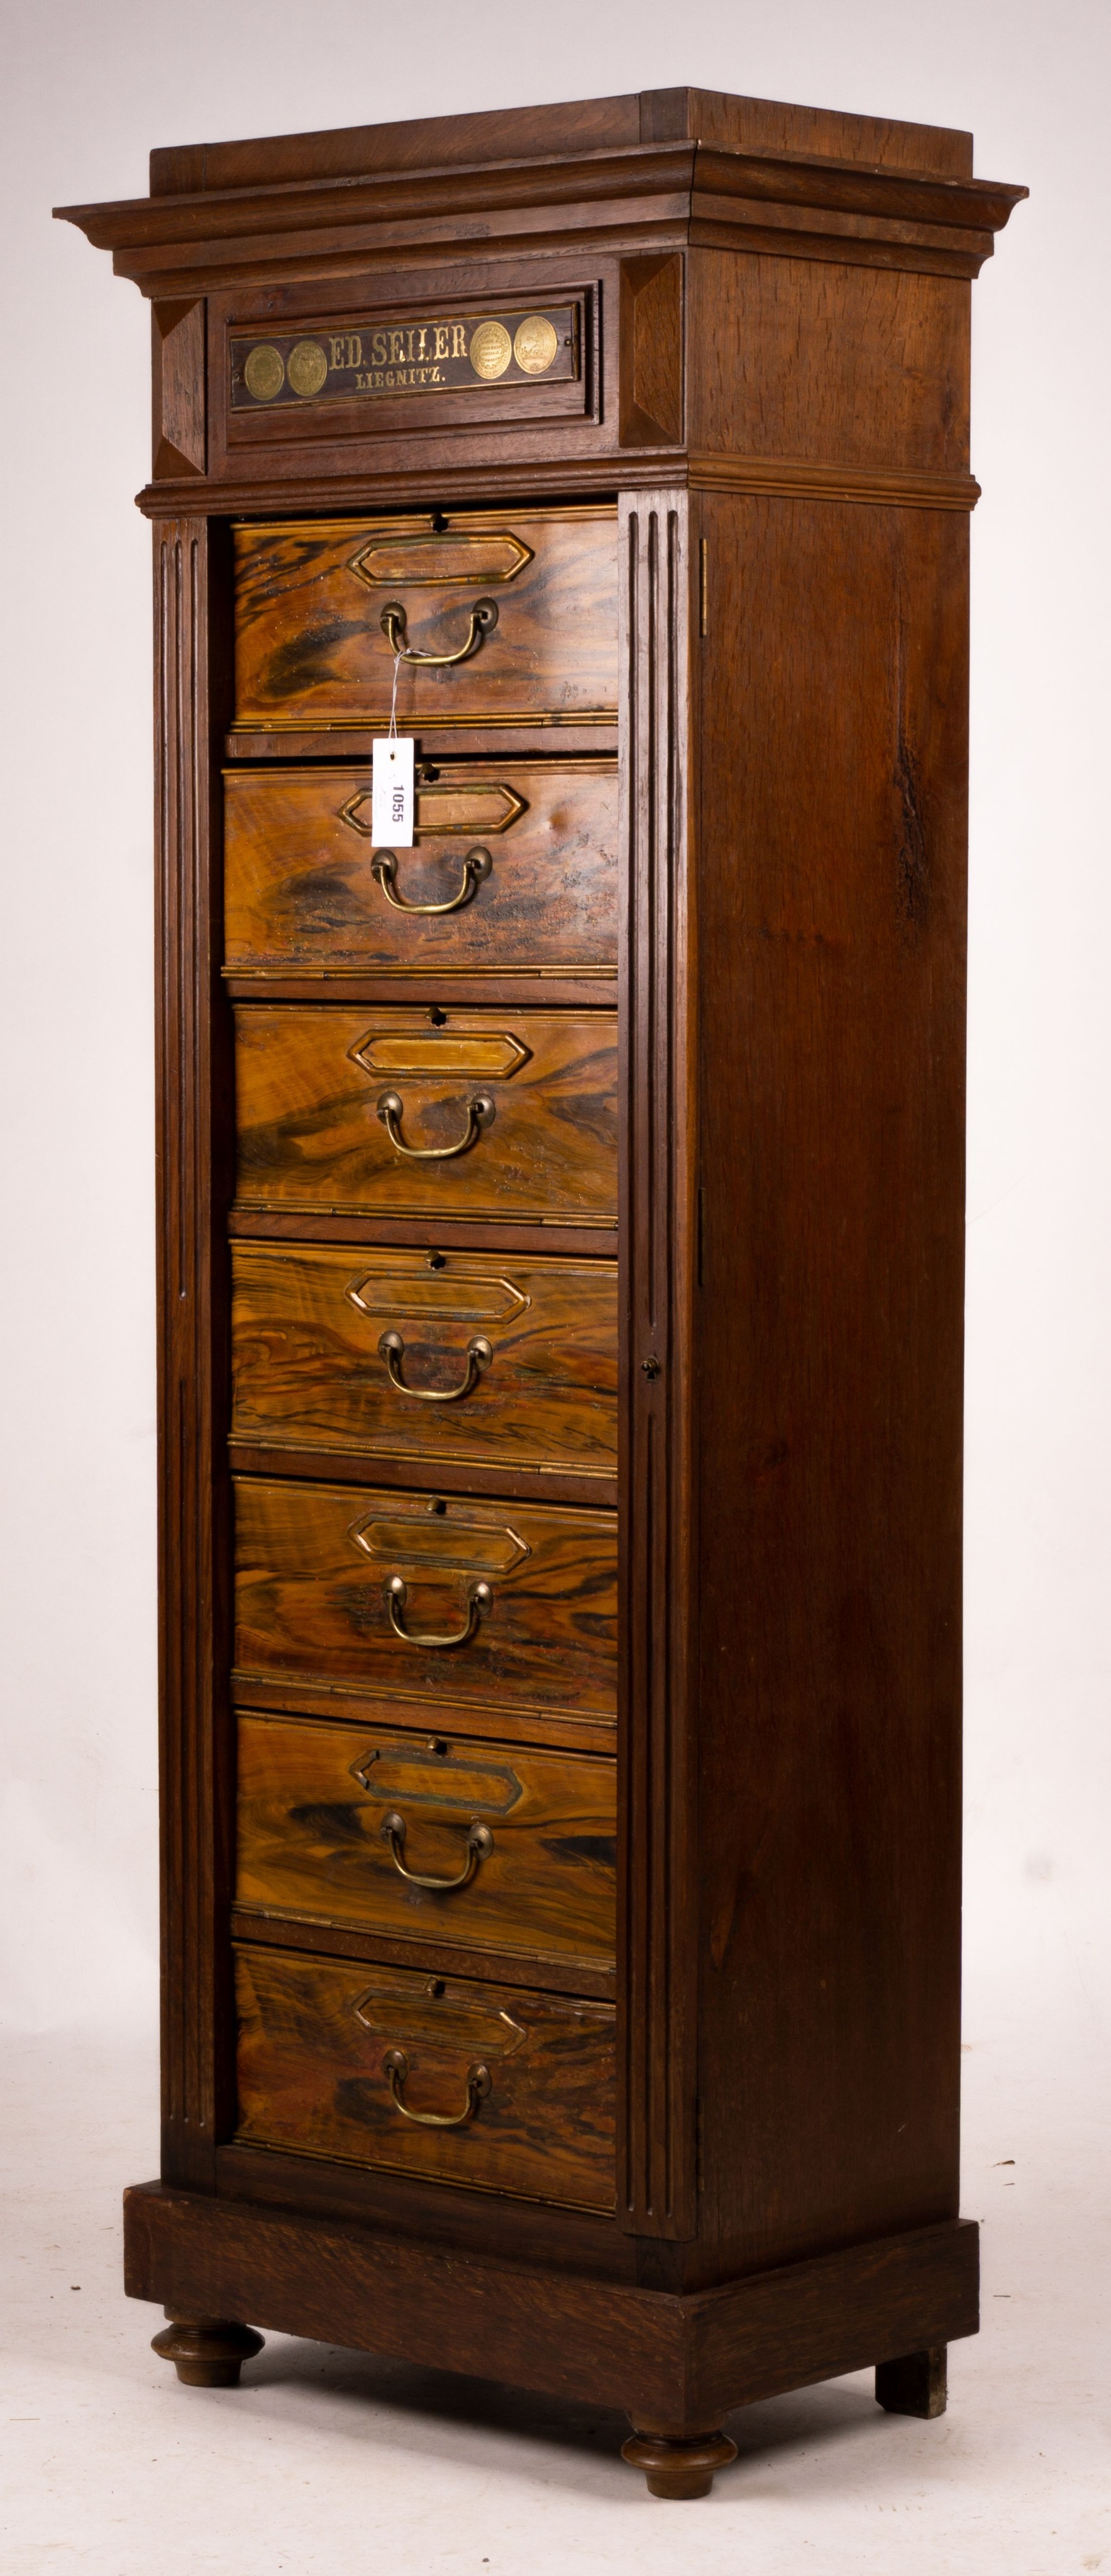 A late 19th / early 20th century oak and simulated walnut shop storage chest / filing cabinet, labelled Ed Seiler, width 57cm, depth 34cm, height 152cm                                                                     